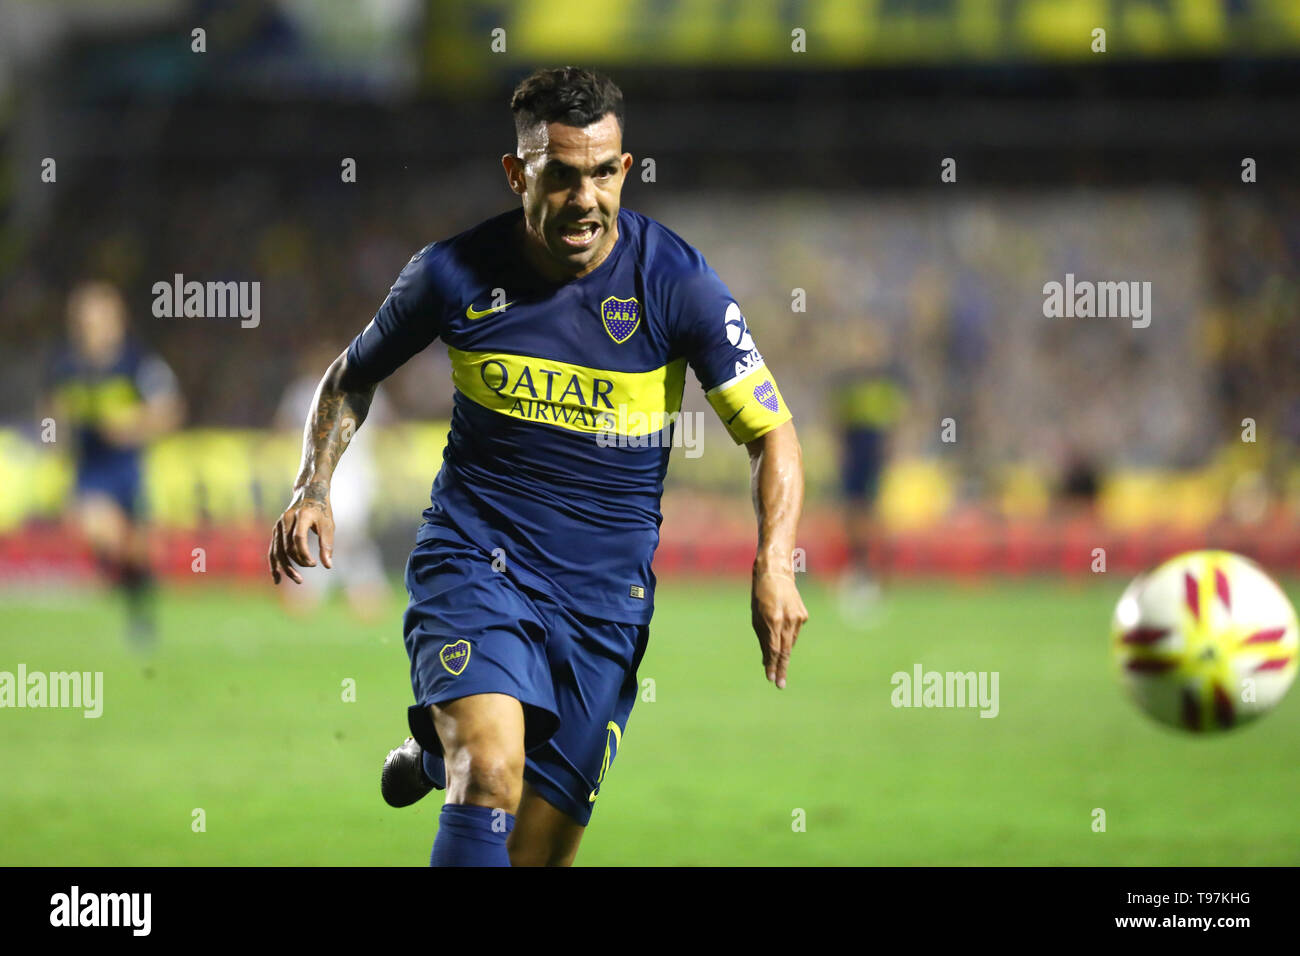 Buenos Aires, Argentina - May 16, 2019: Carlos Tevez (boca Juniors) chasing the ball in the match against Velez for the Superliga cup 2019 in Buenos A Stock Photo